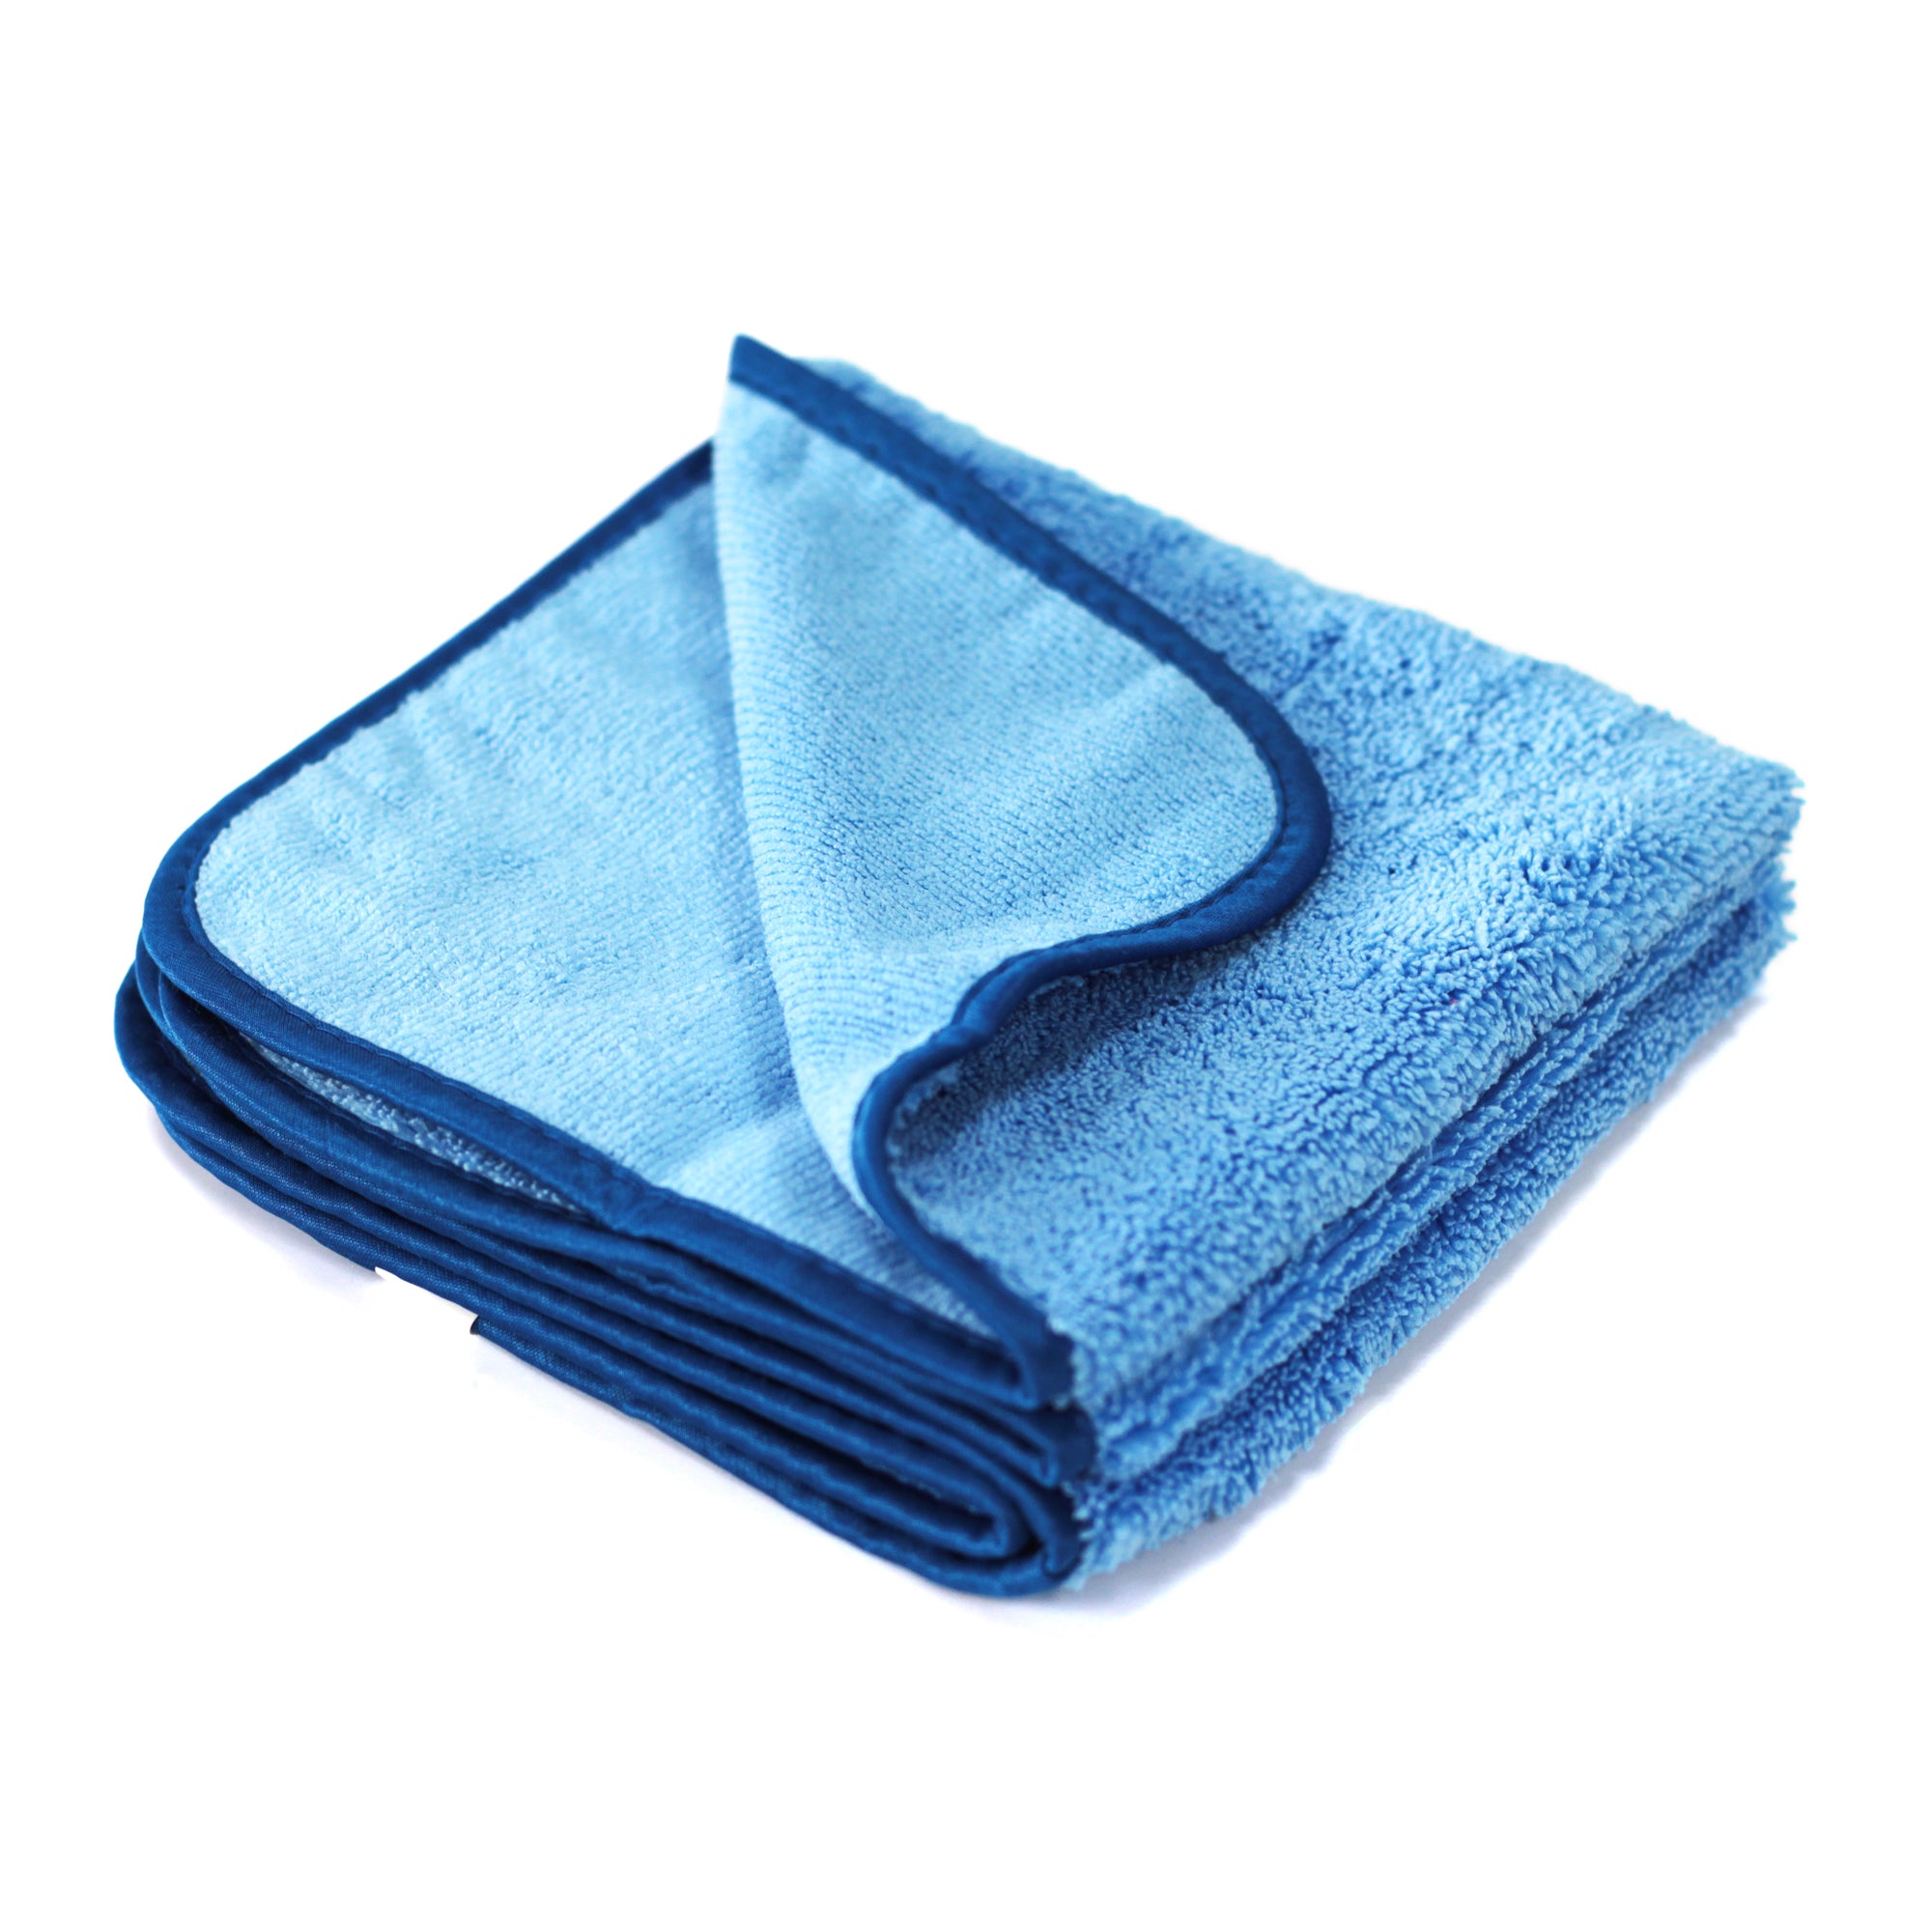 800 GSM Dual sided coral fleece thick & plush microfiber towel